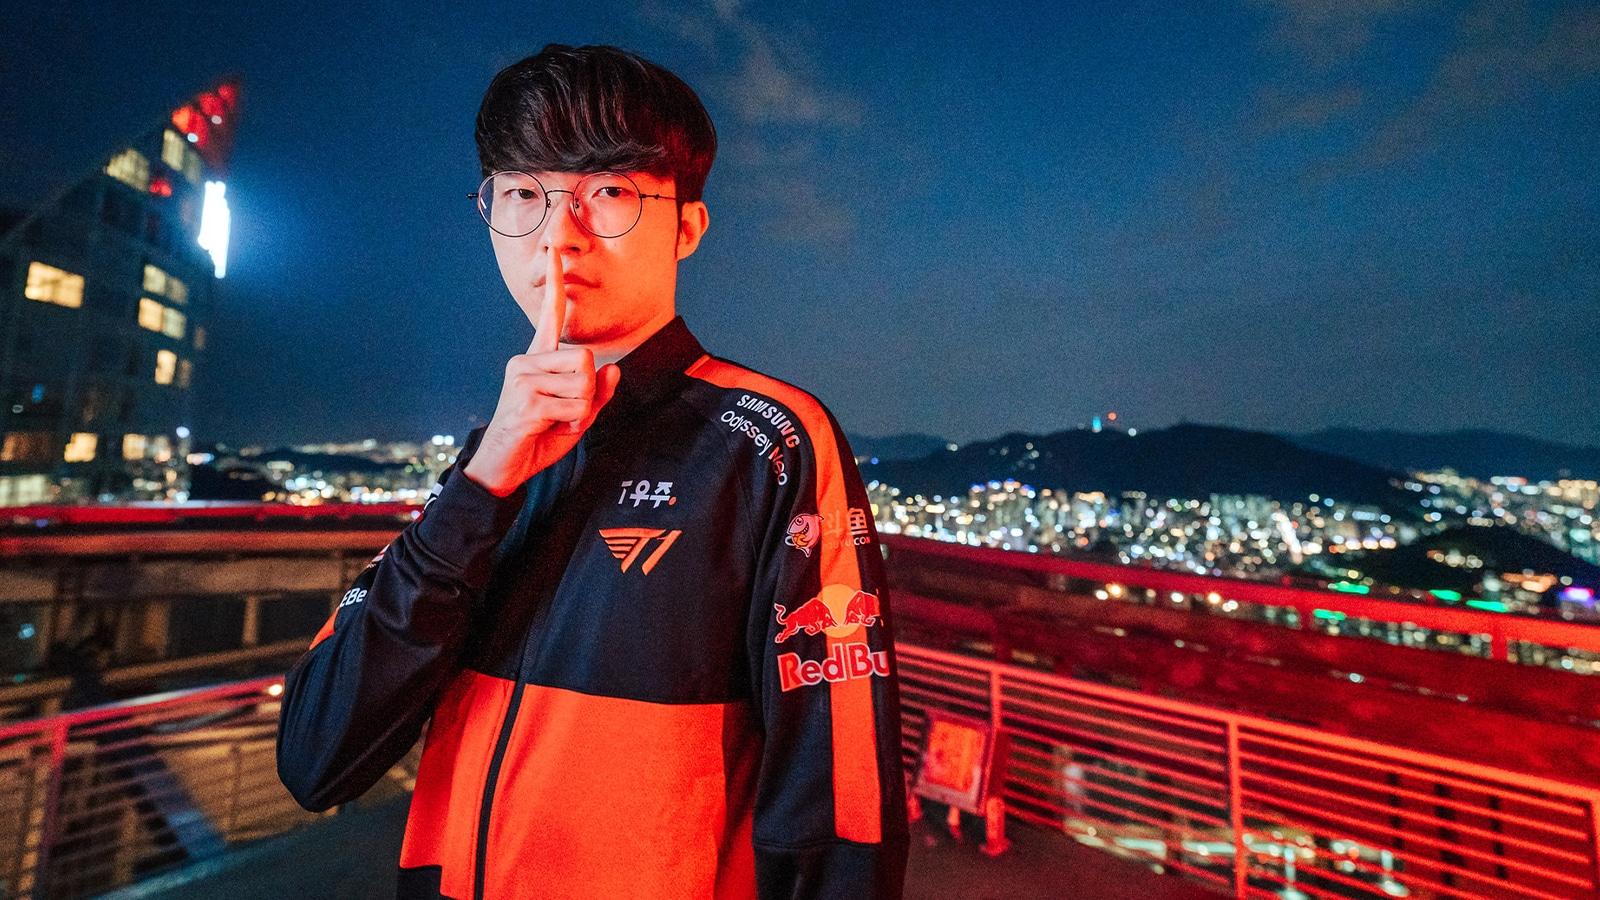 For his teammates. ❤️ #Worlds2023 _ #lolesports #esports #leagueoflegends  #esport #faker #T1 #LCK